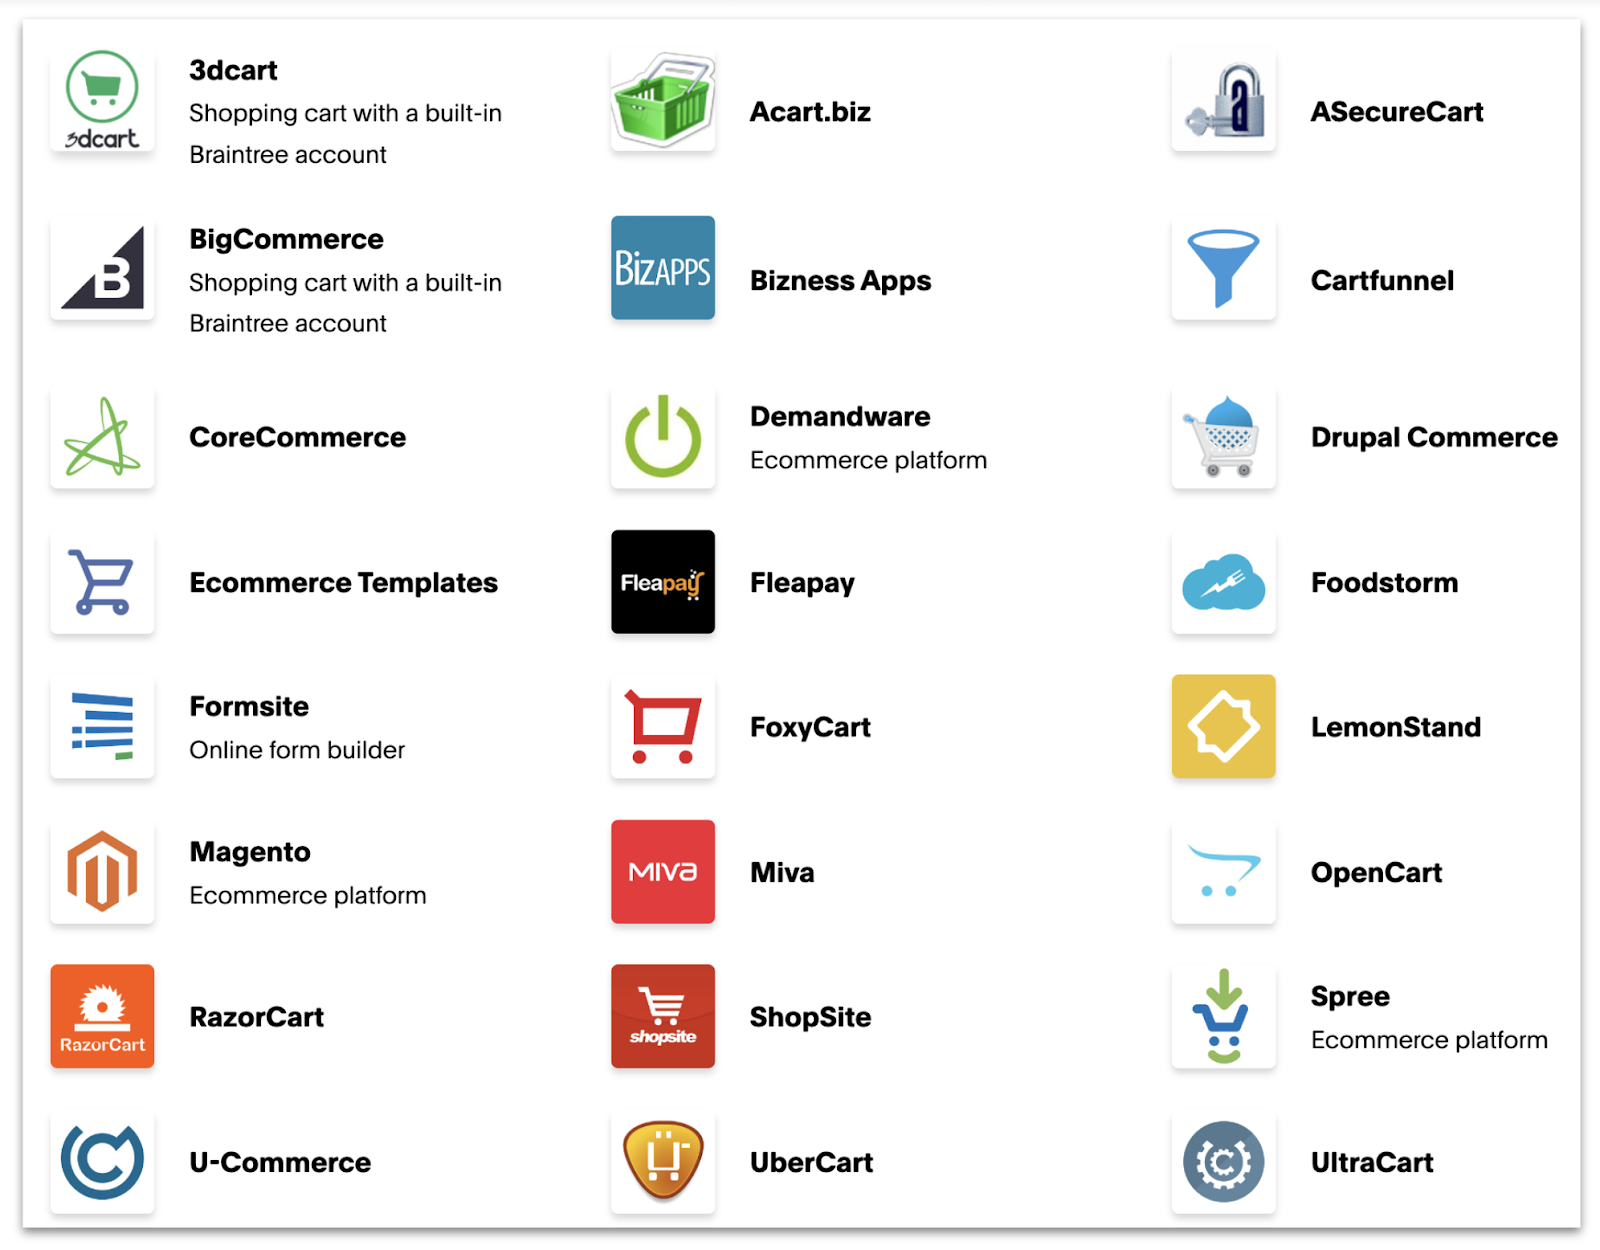 Braintree's third-party integrations